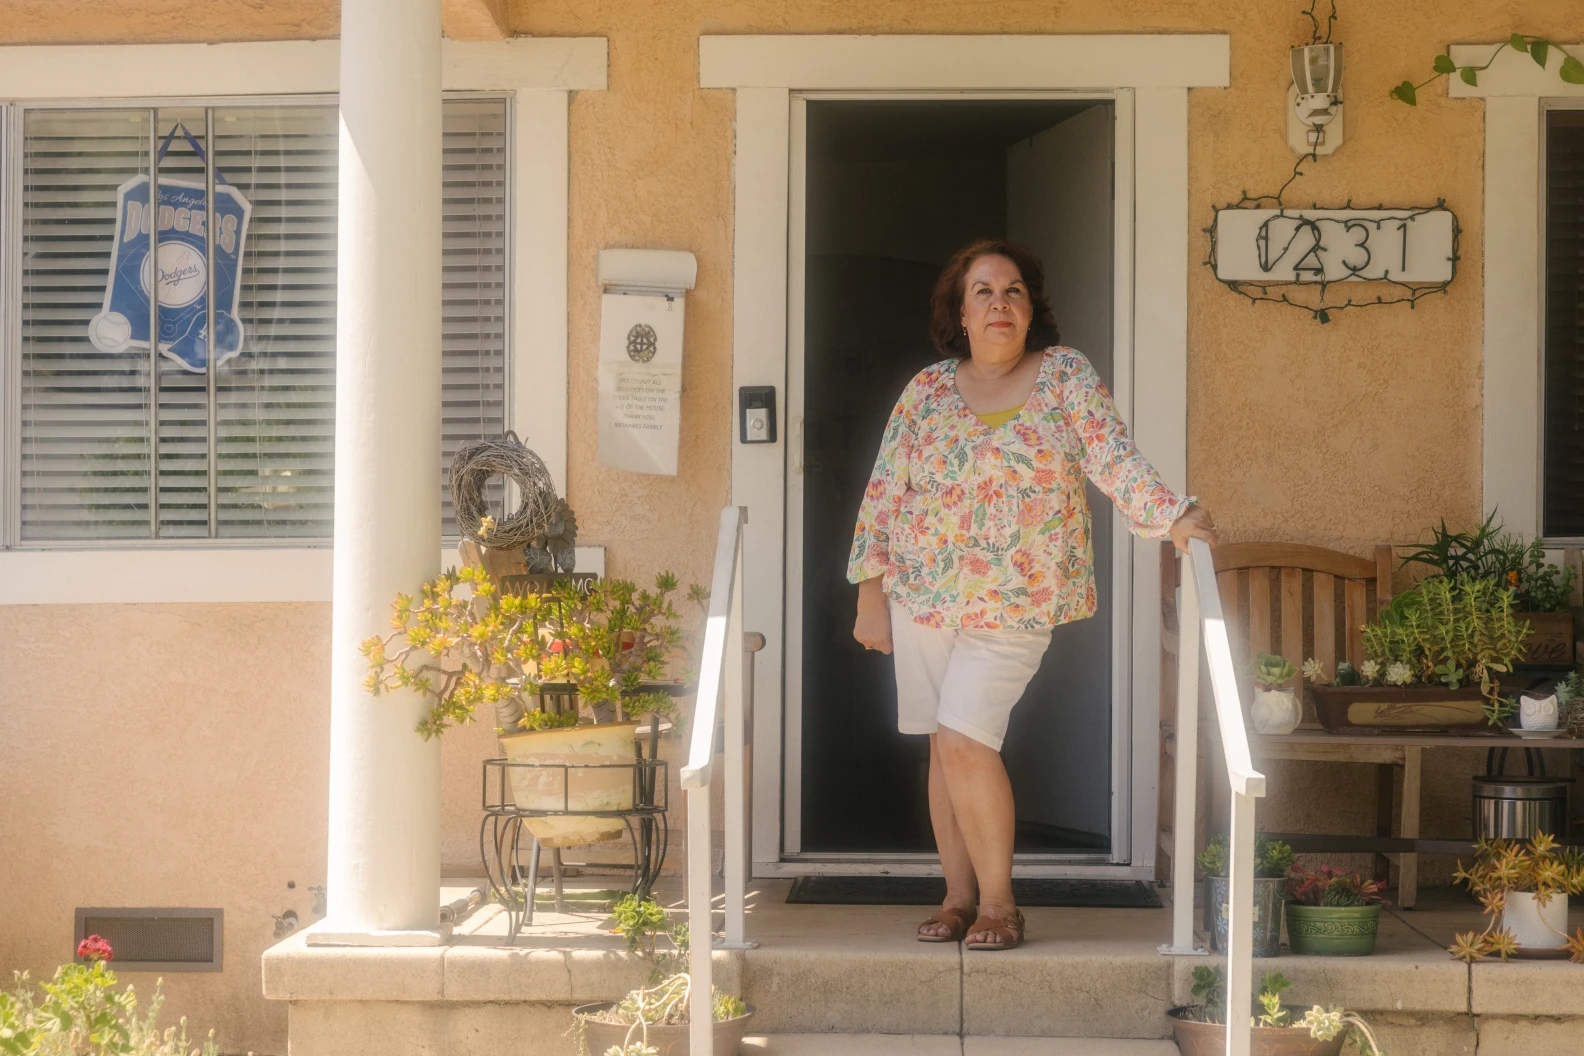 A woman in a flowery long-sleeved shirt stands in front of a home.